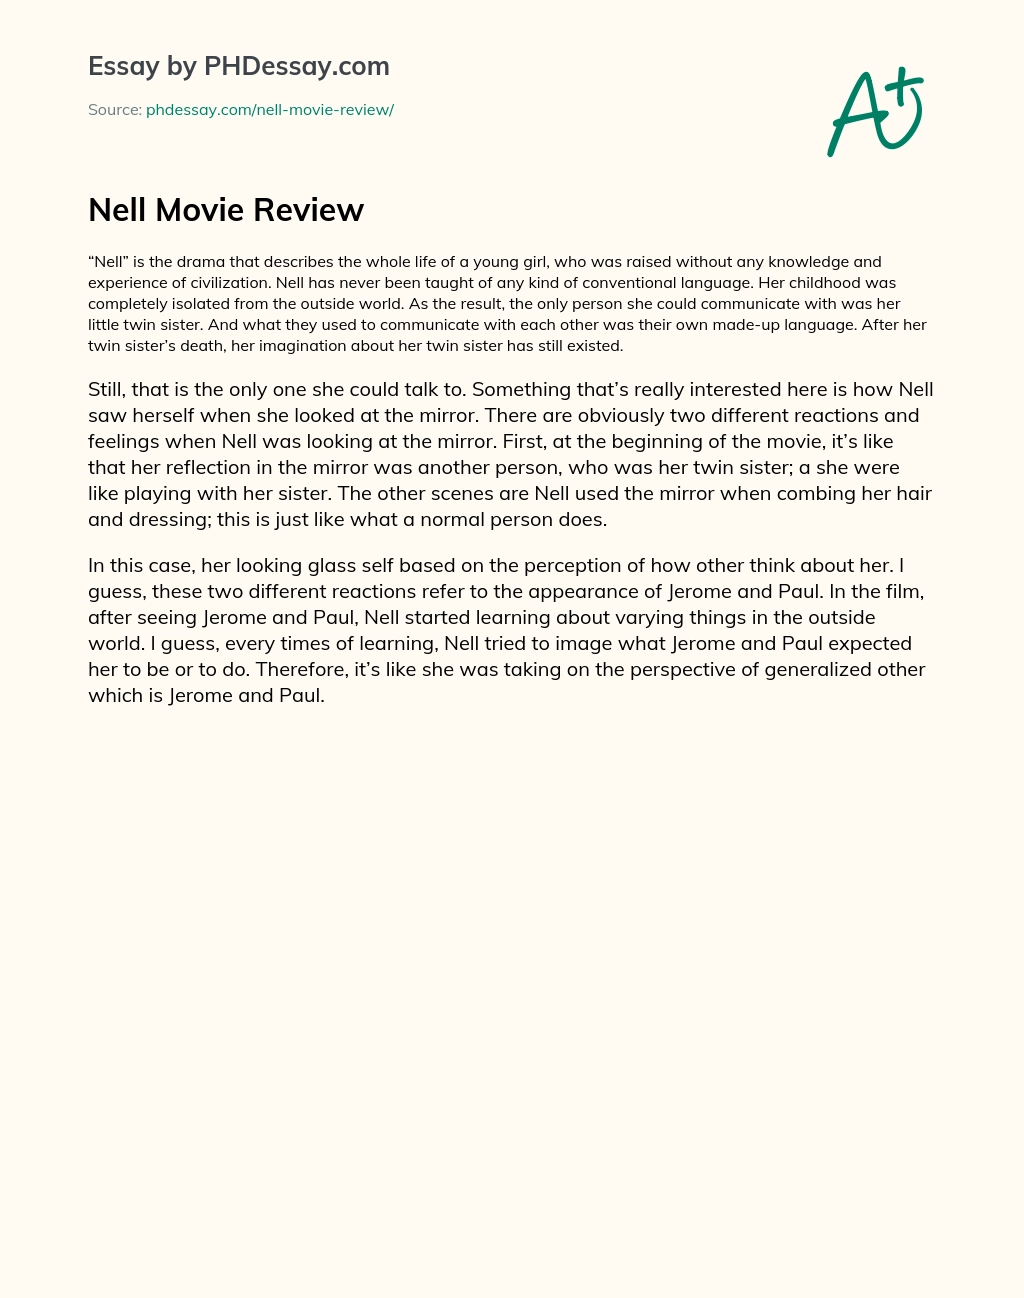 Nell Movie Review essay